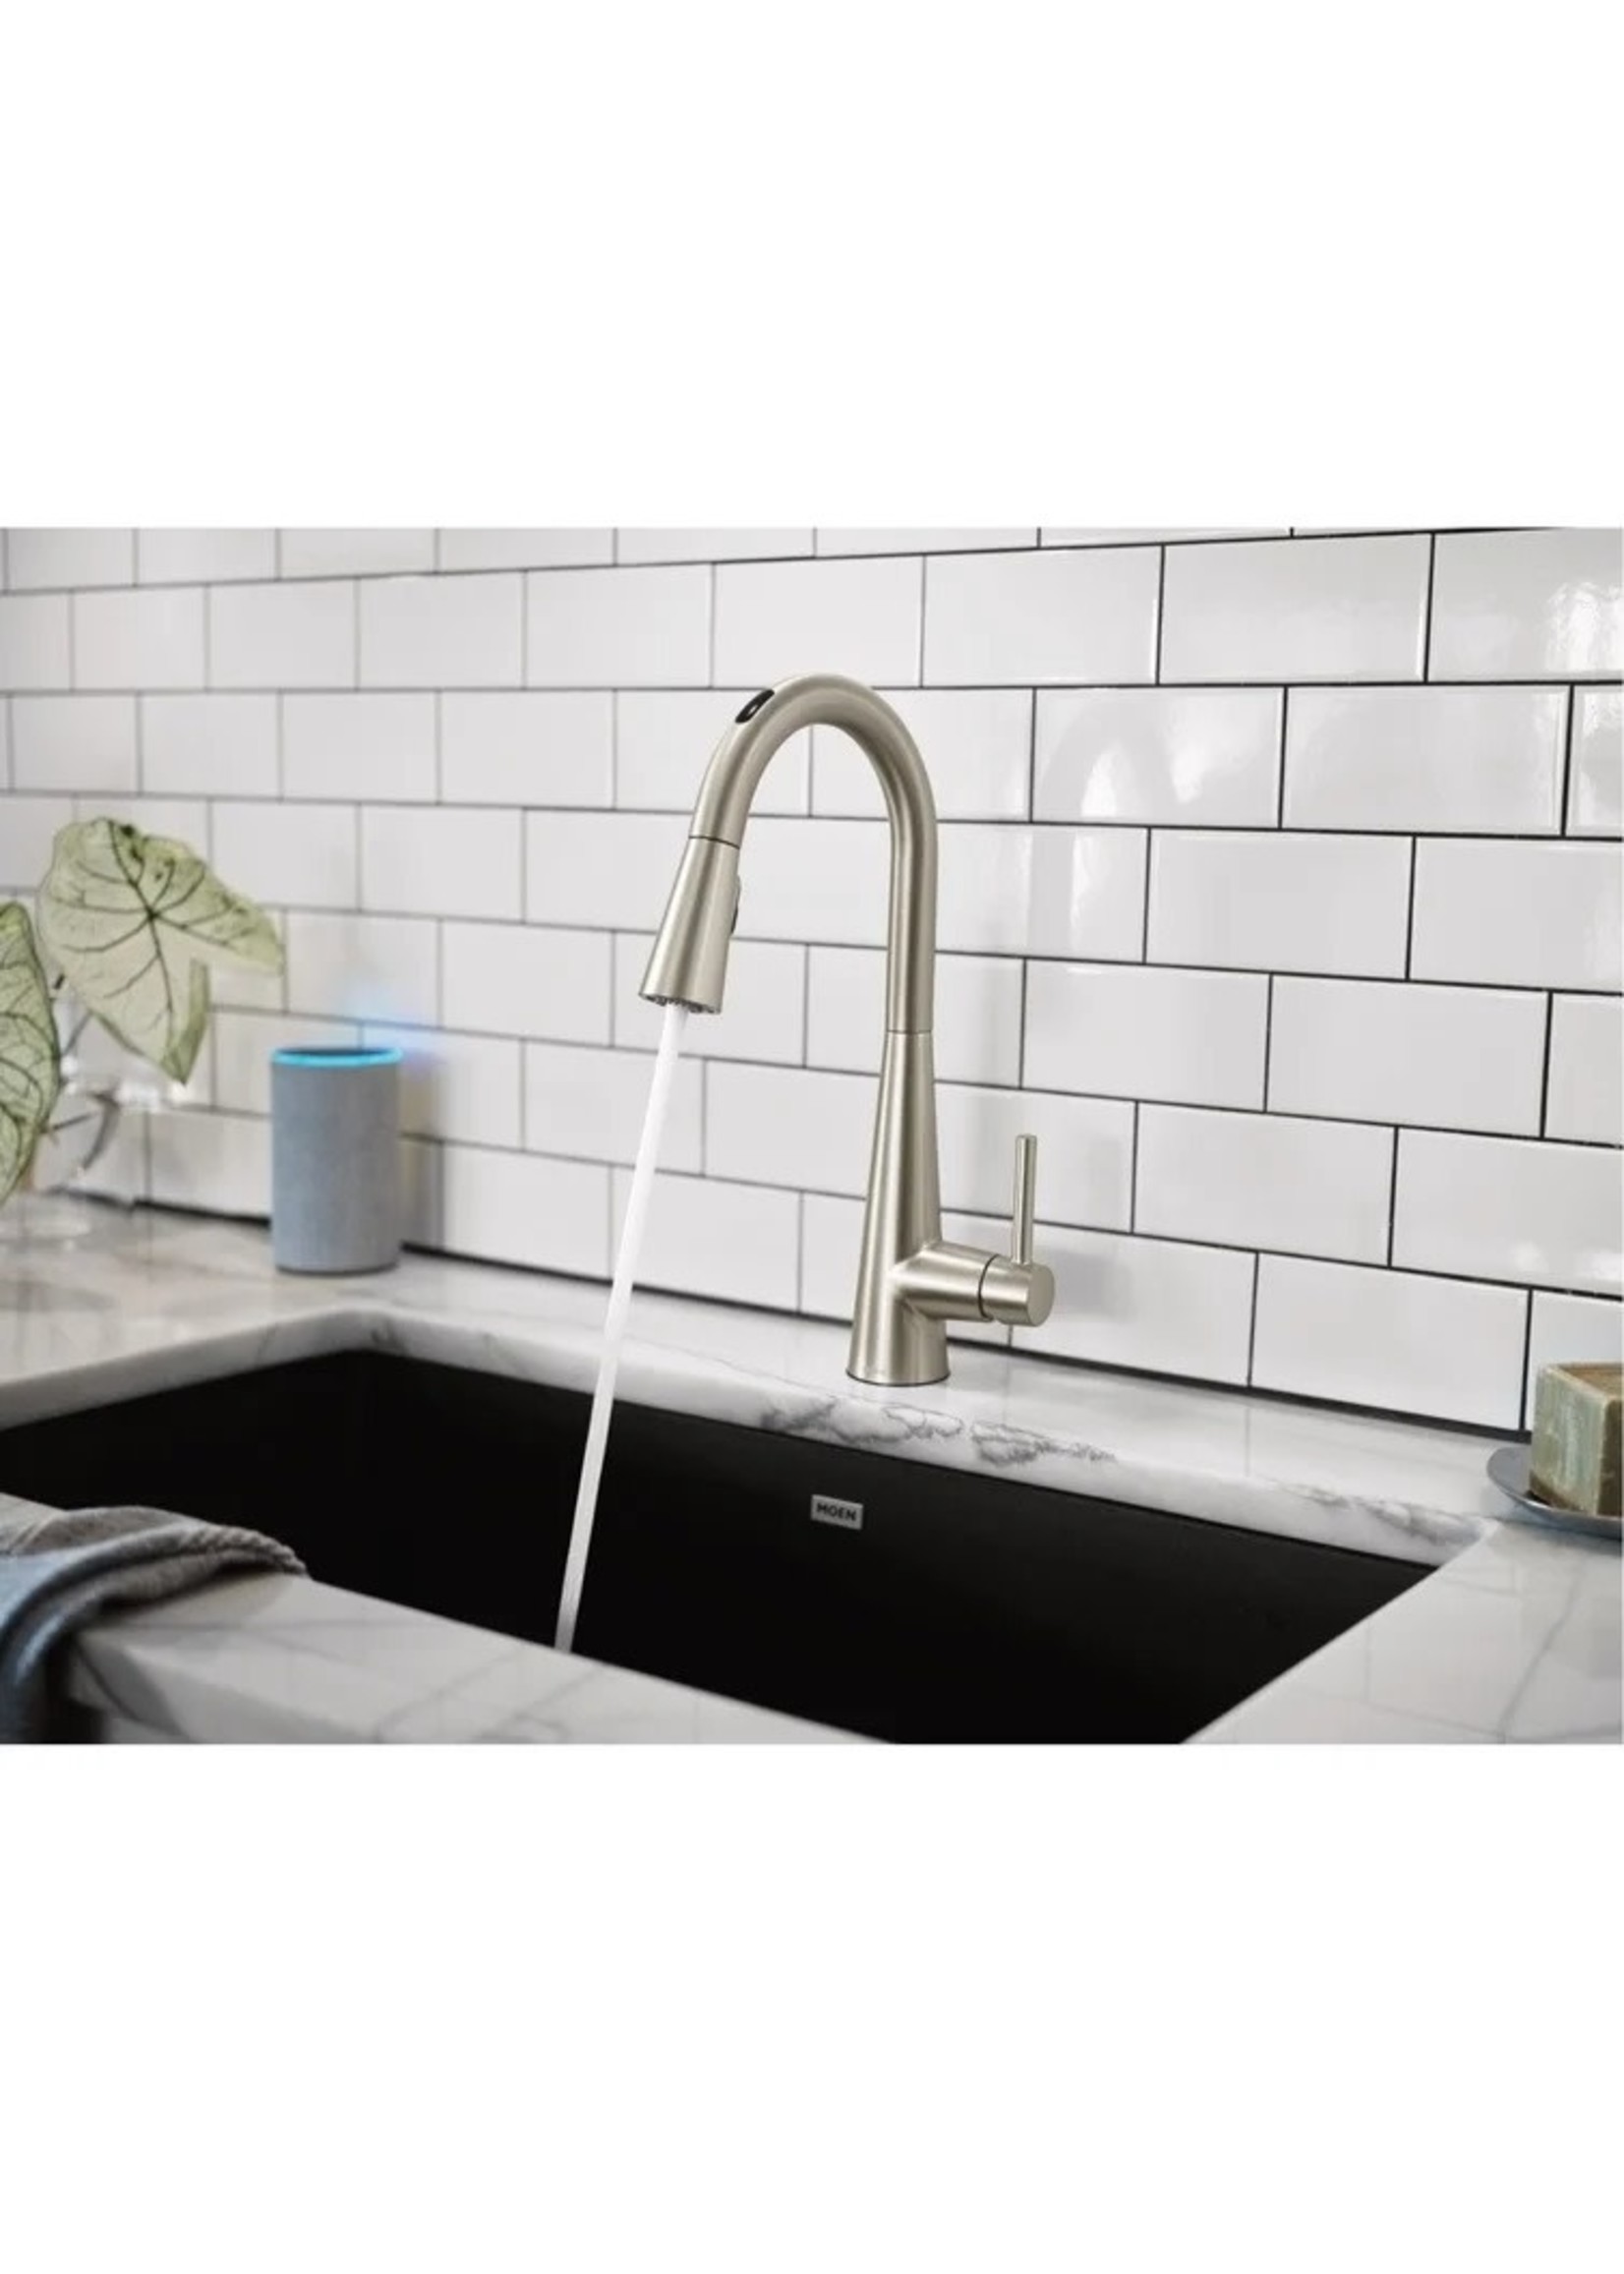 *Moen Sleek Smart Touchless Single Handle Kitchen Faucet with Power Clean and Duralock